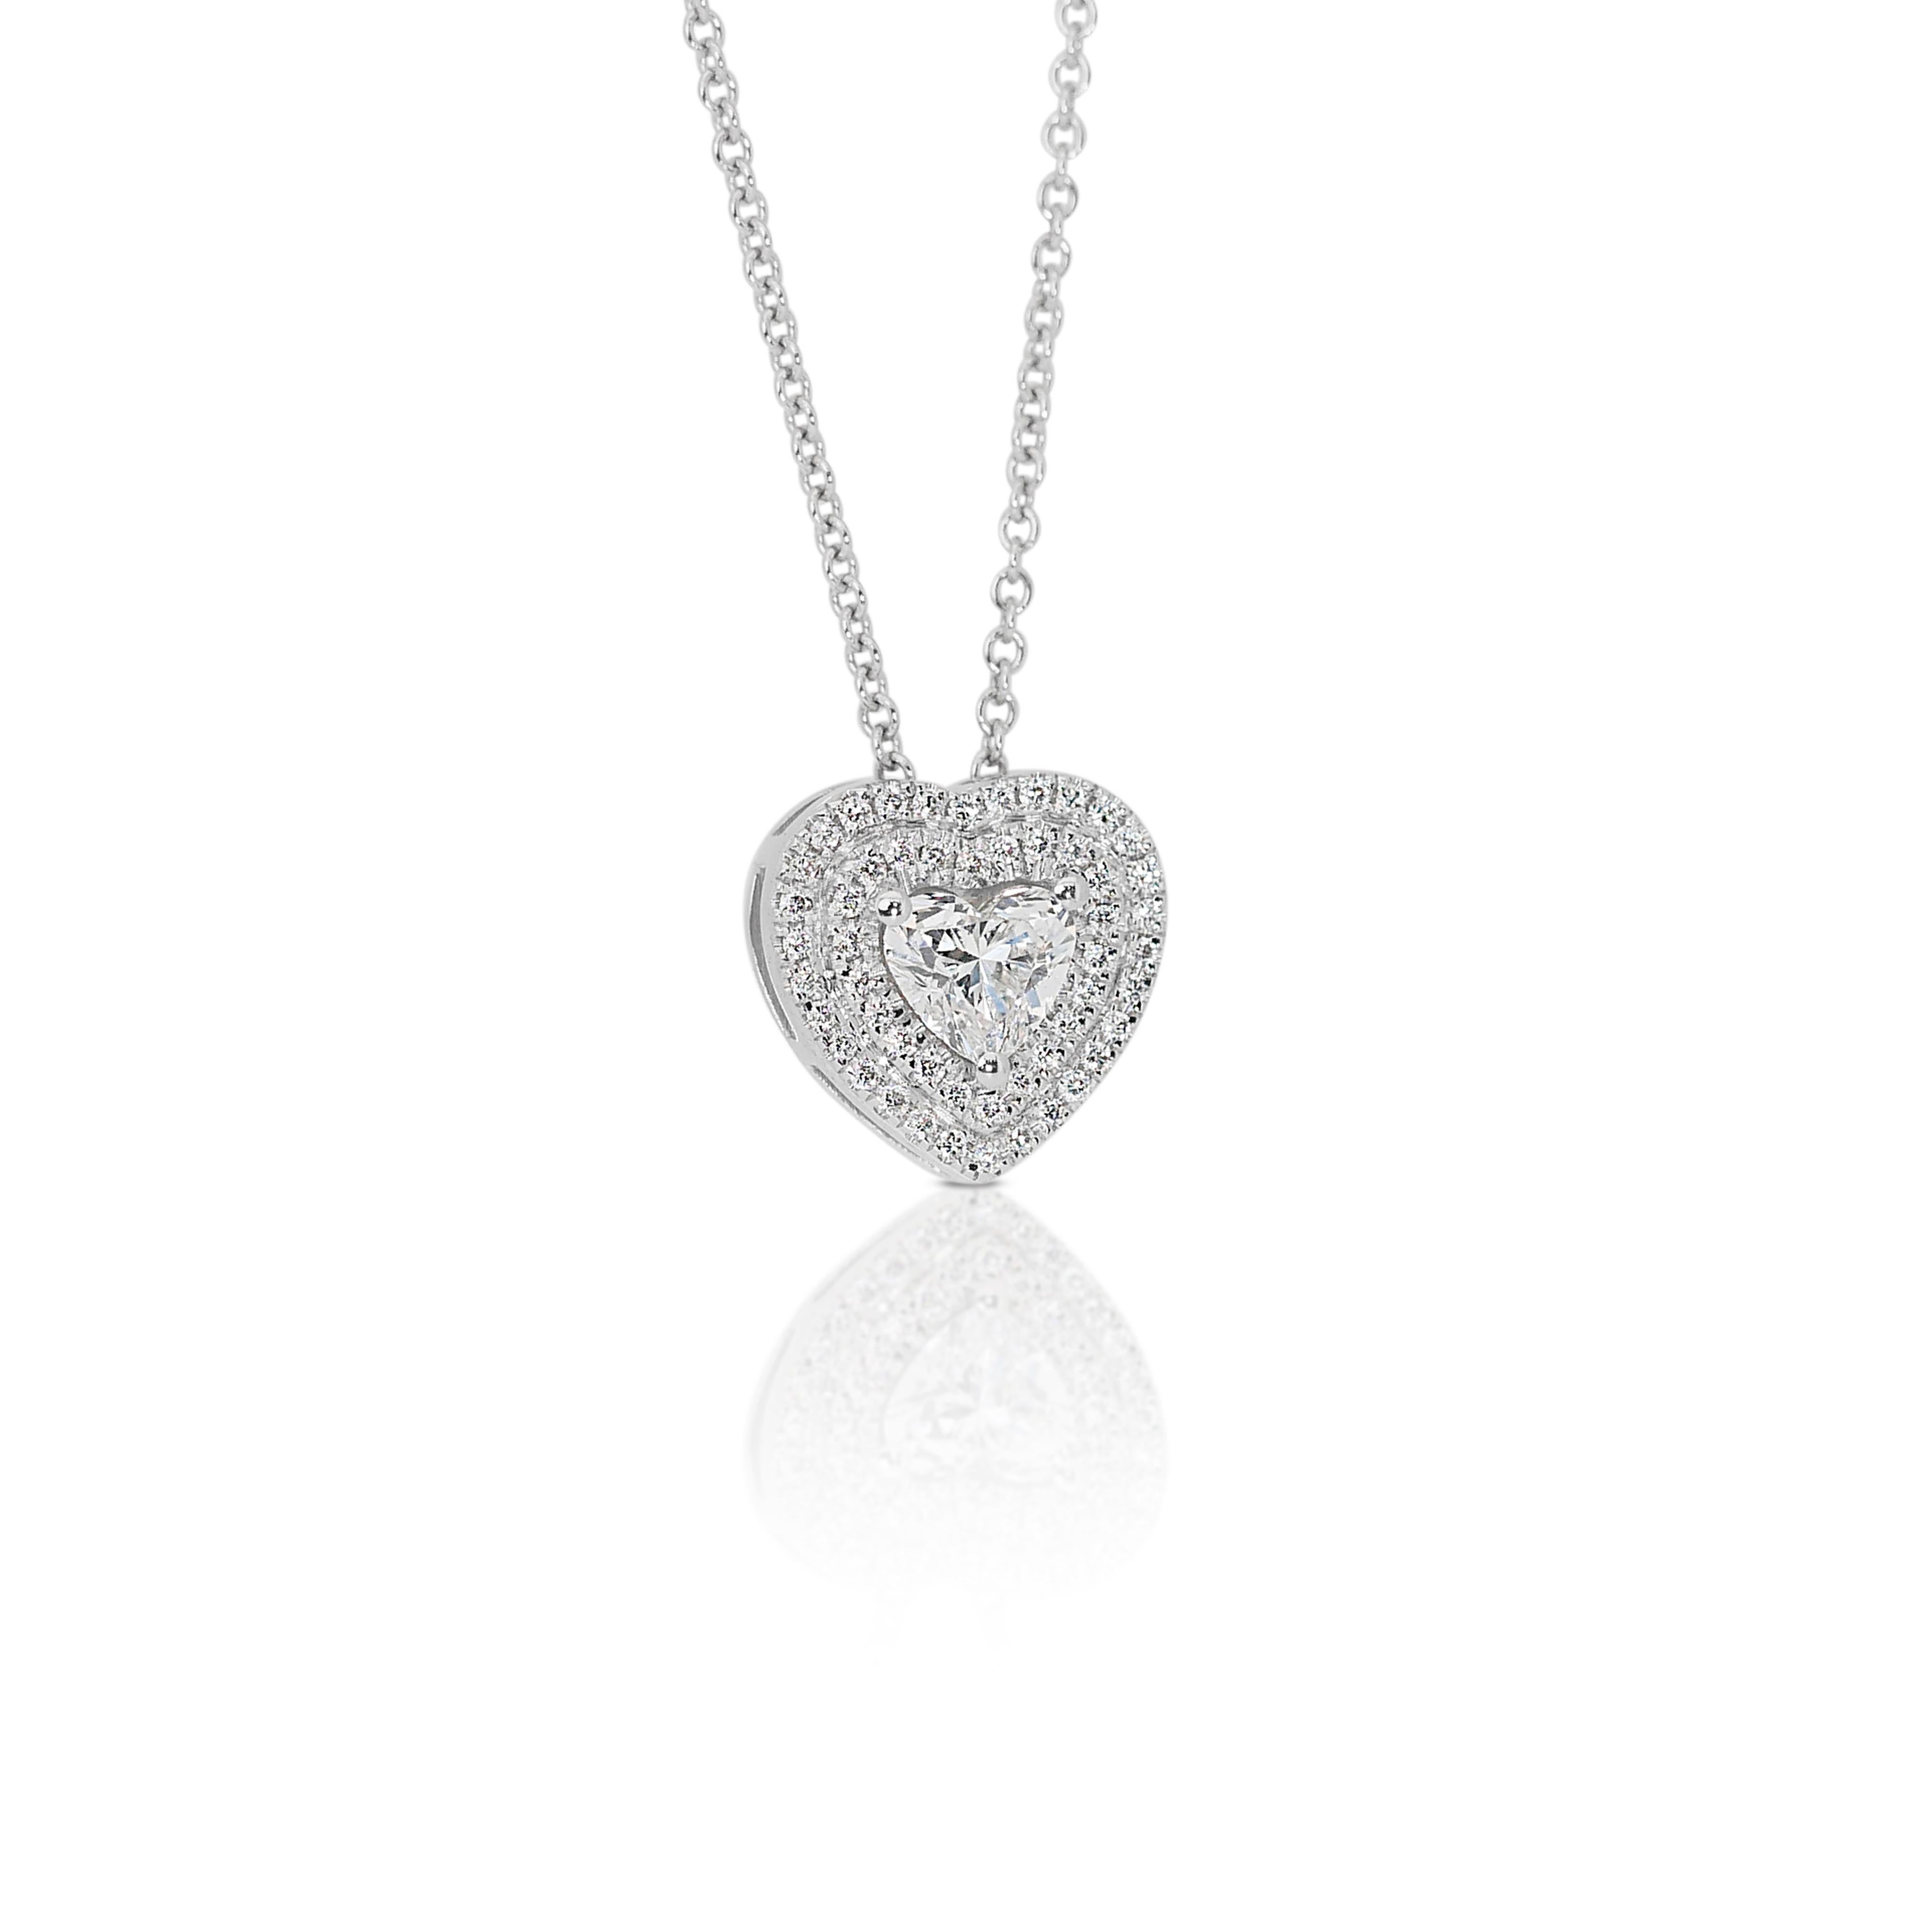 Elegant 0.80ct Heart-Shaped Diamond Halo Necklace in 18k White Gold - GIA Certif For Sale 1